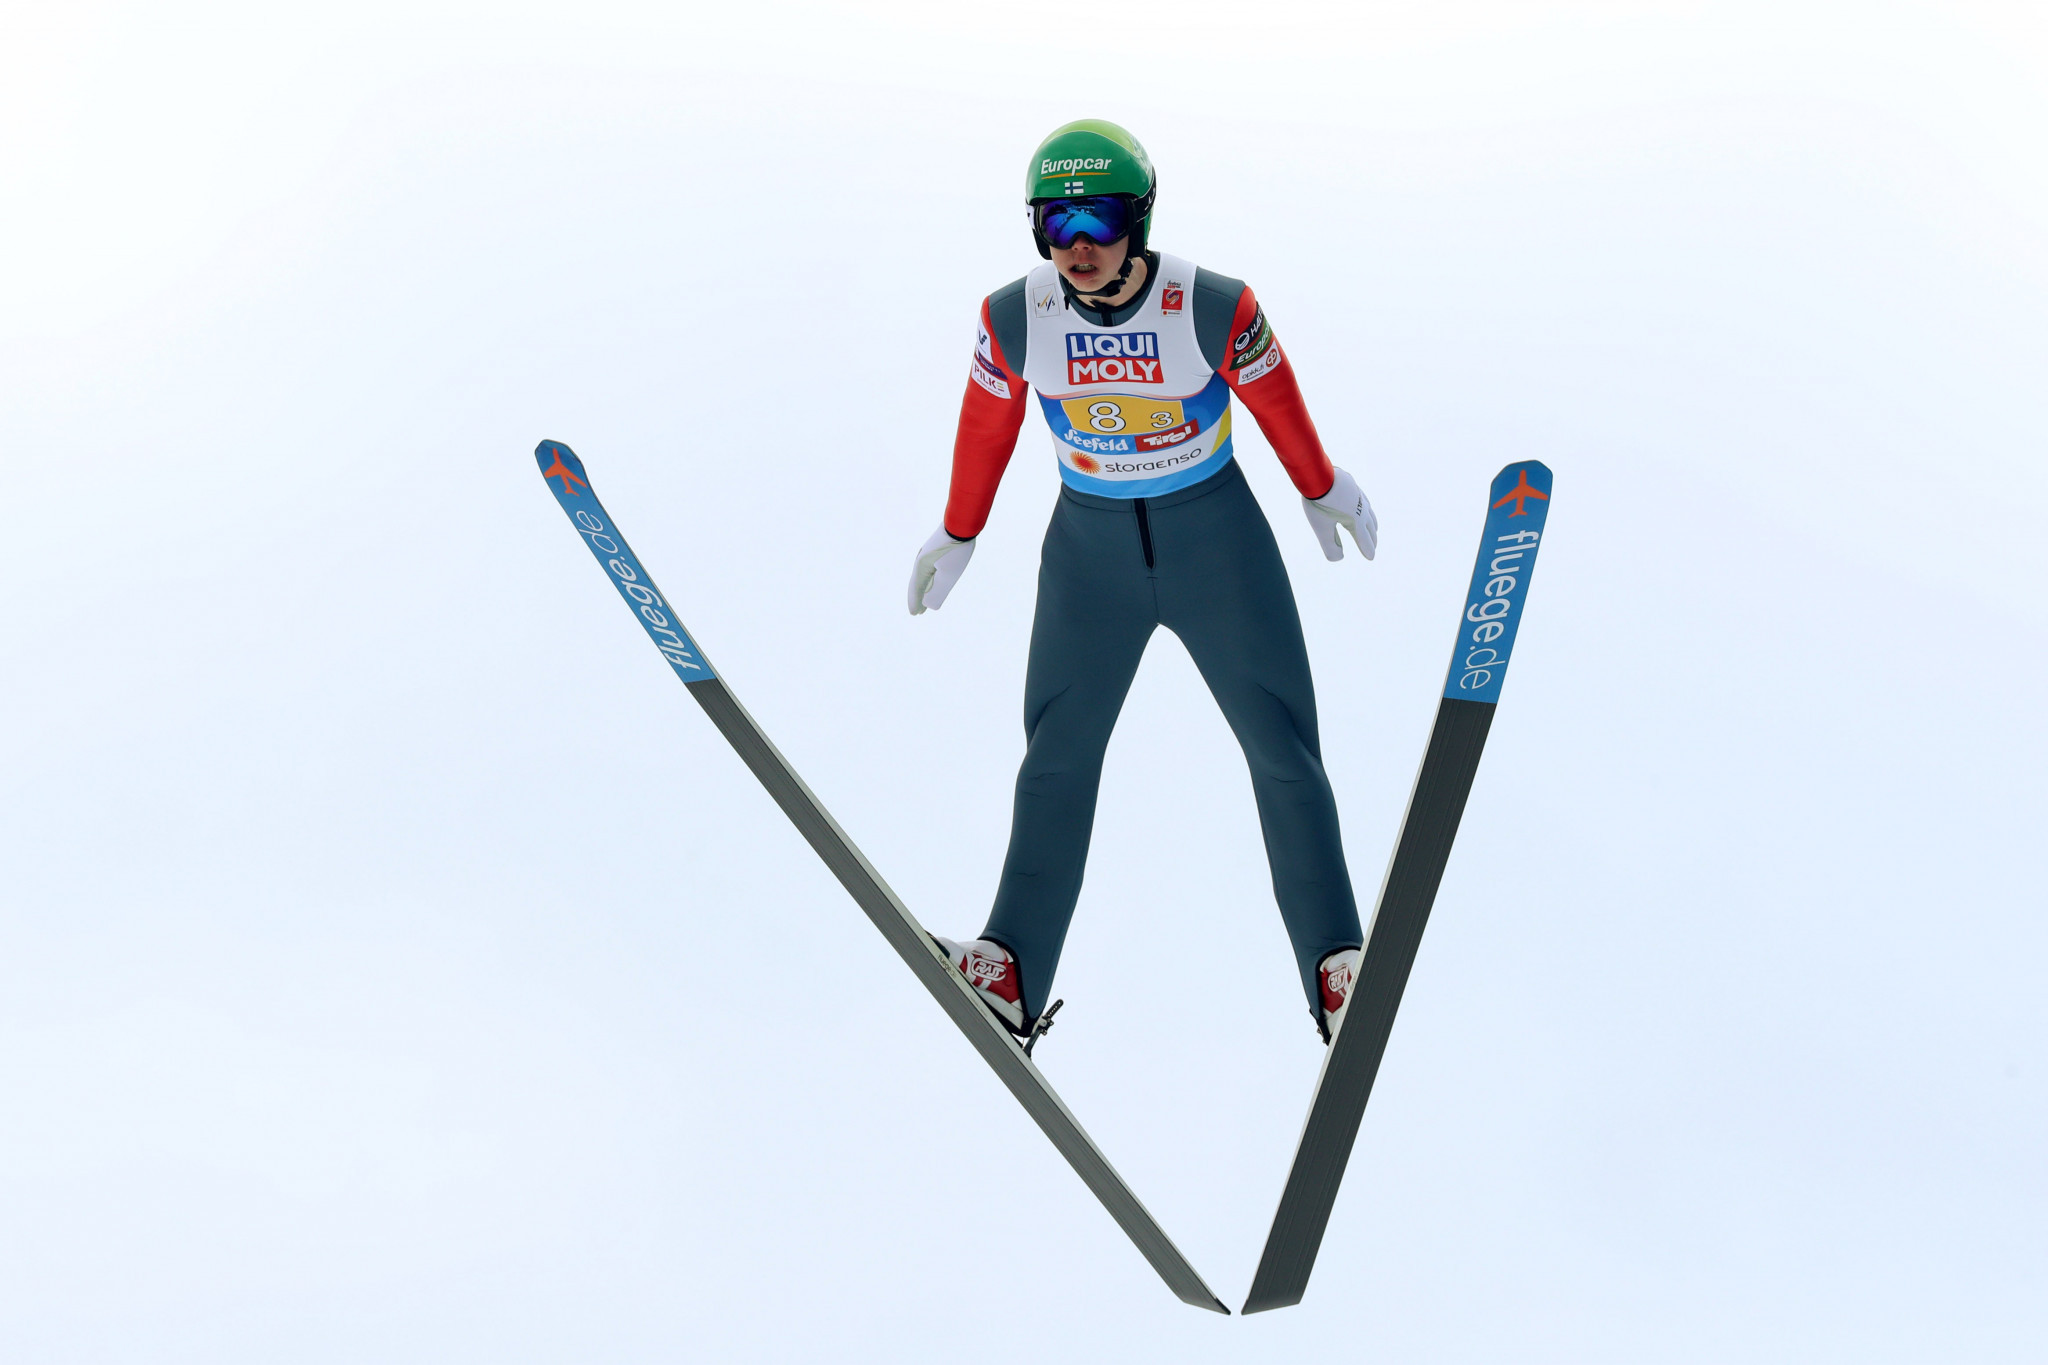 Former junior world champion shows support for development of women's Nordic combined